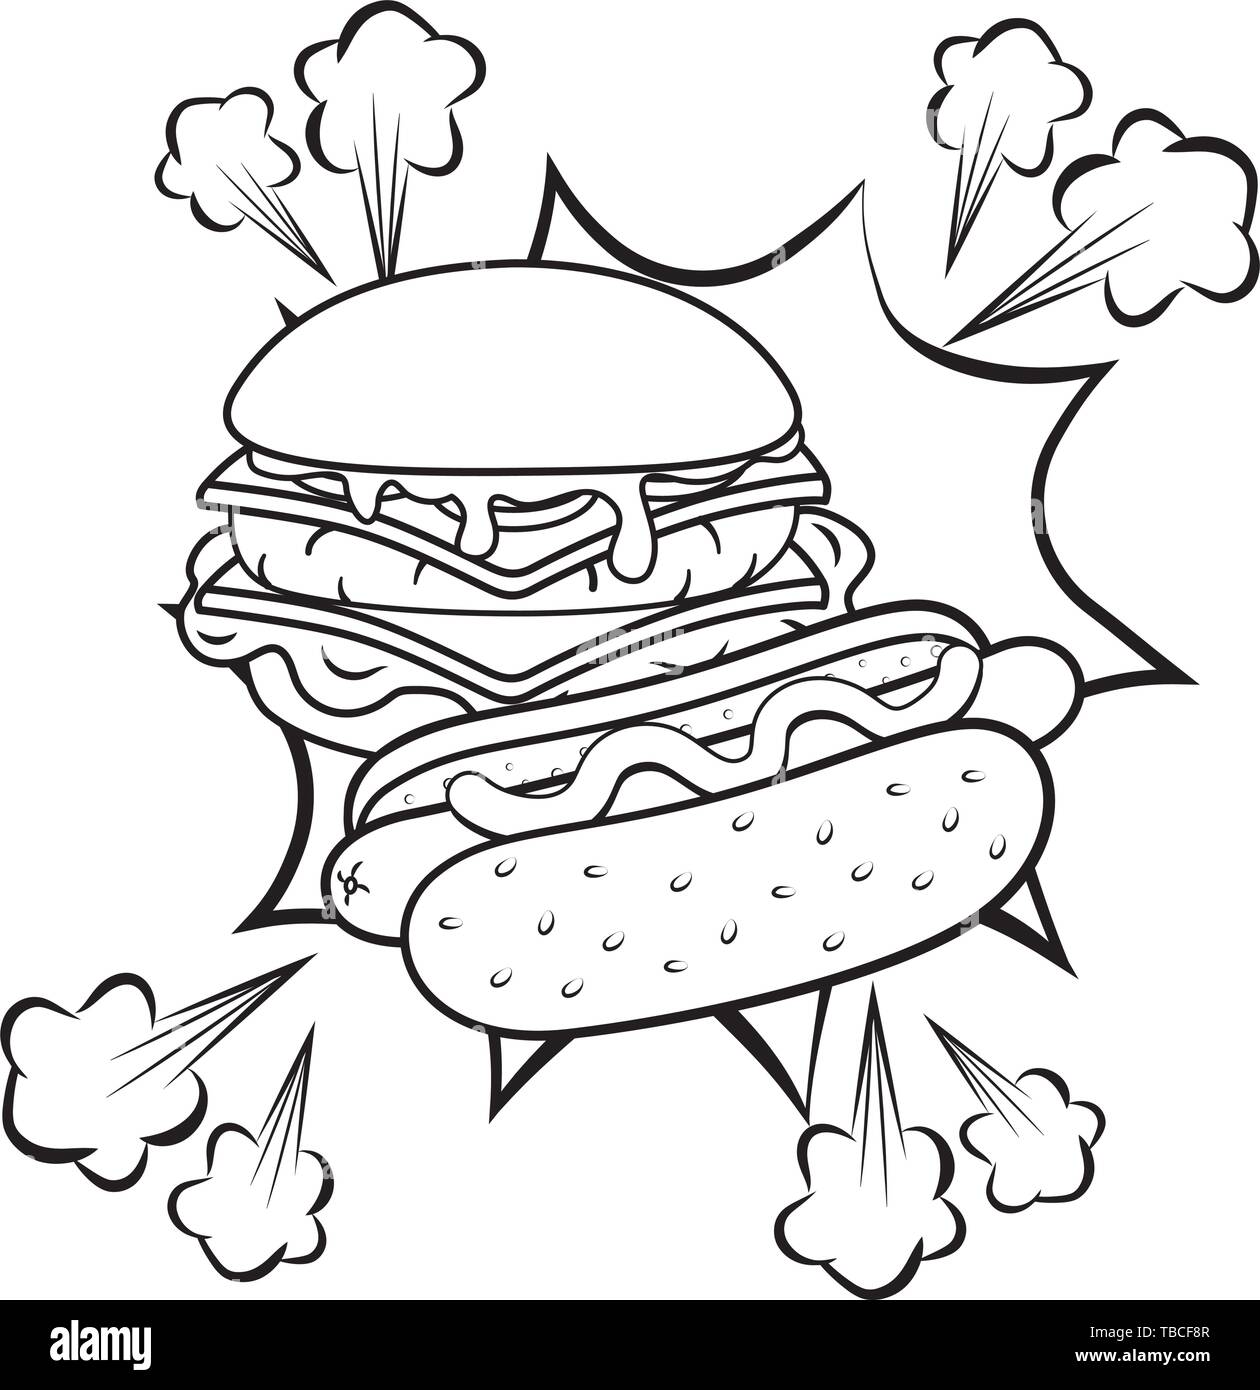 hamburger and hot dog with sauce icon cartoon pop art black and white vector illustration graphic design Stock Vector